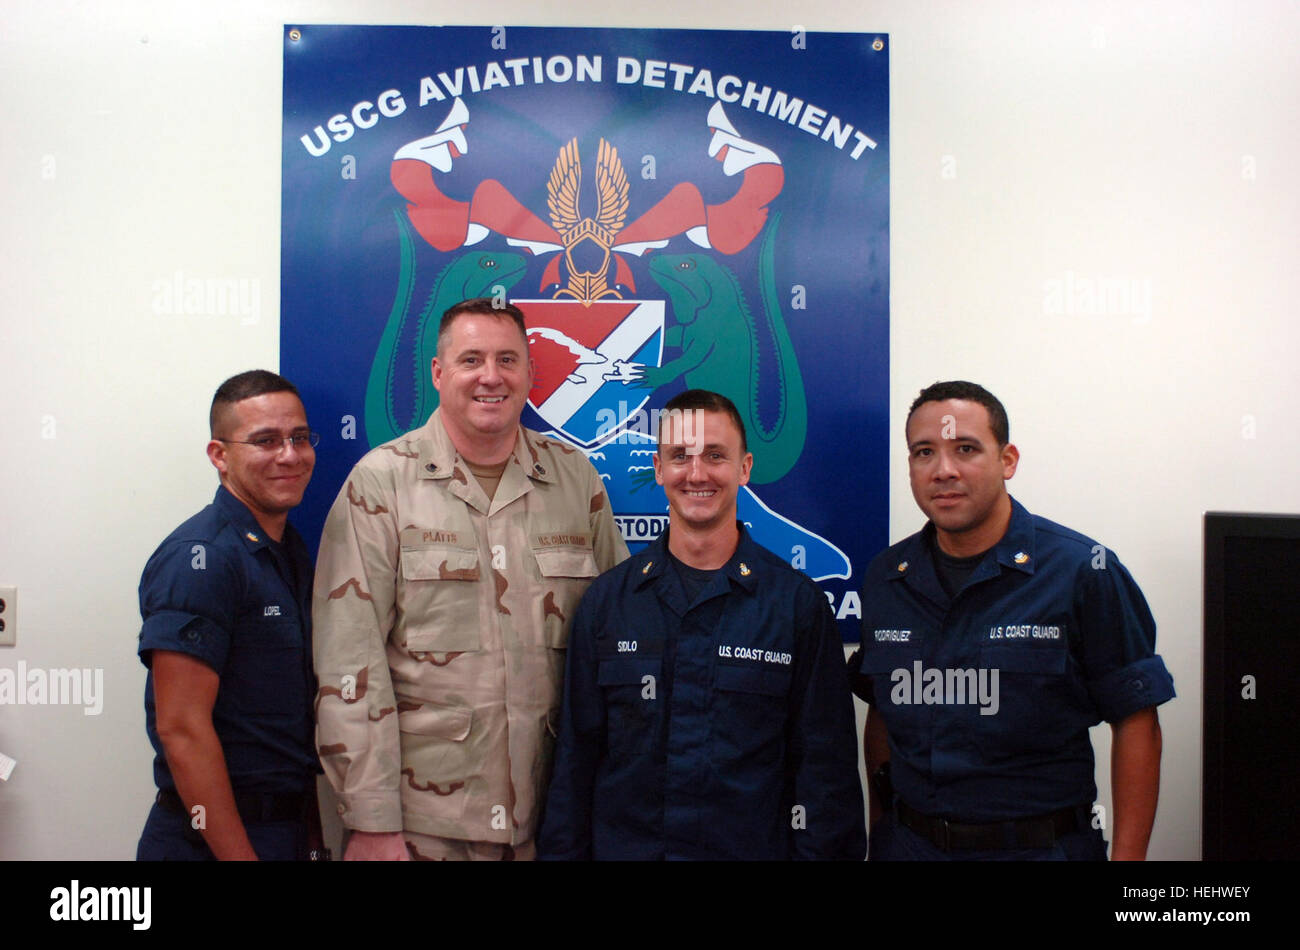 GUANTANAMO BAY, Cuba – Aviation detachment members; Coast Guard Petty Officer 2nd Class Anthony Lopez, Petty Officer 1st Class John Platts, Chief Petty Officer Corey Sidlo and Petty Officer  2nd Class Carlos Rodriguez, pose for a picture, April 20, 2009. The aviation detachment, which is stationed at Joint Task Force Guantanamo, is part of U.S. Coast Guard Air Station Miami. JTF Guantanamo conducts safe, humane, legal and transparent care and custody of detainees, including those convicted by military commission and those ordered released. The JTF conducts intelligence collection, analysis and Stock Photo